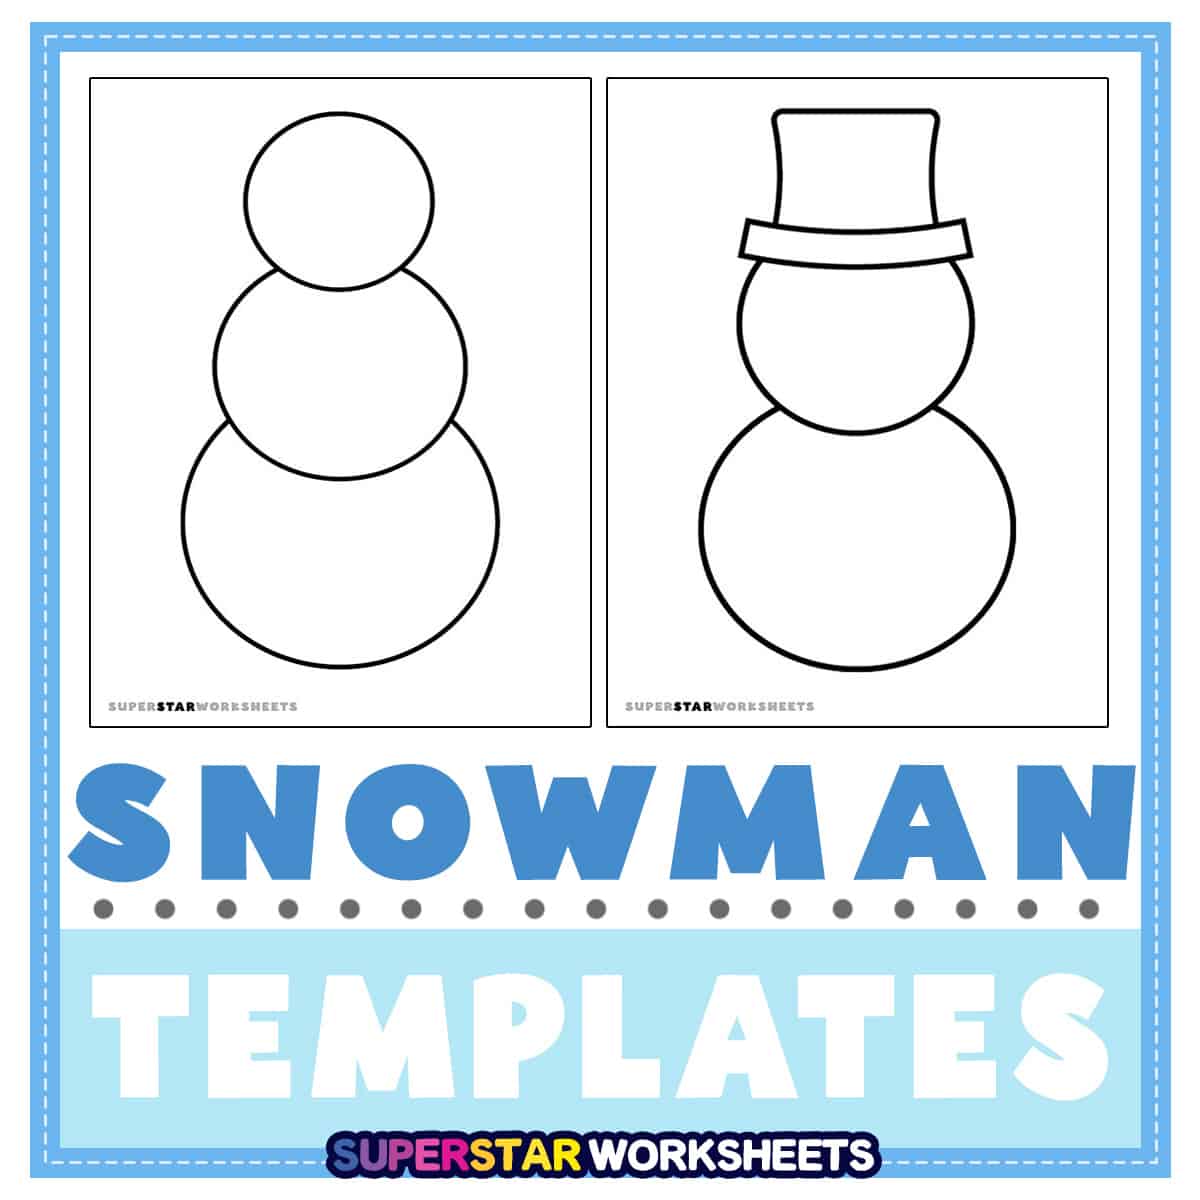 Two snowman templates showing the variety of templates included.